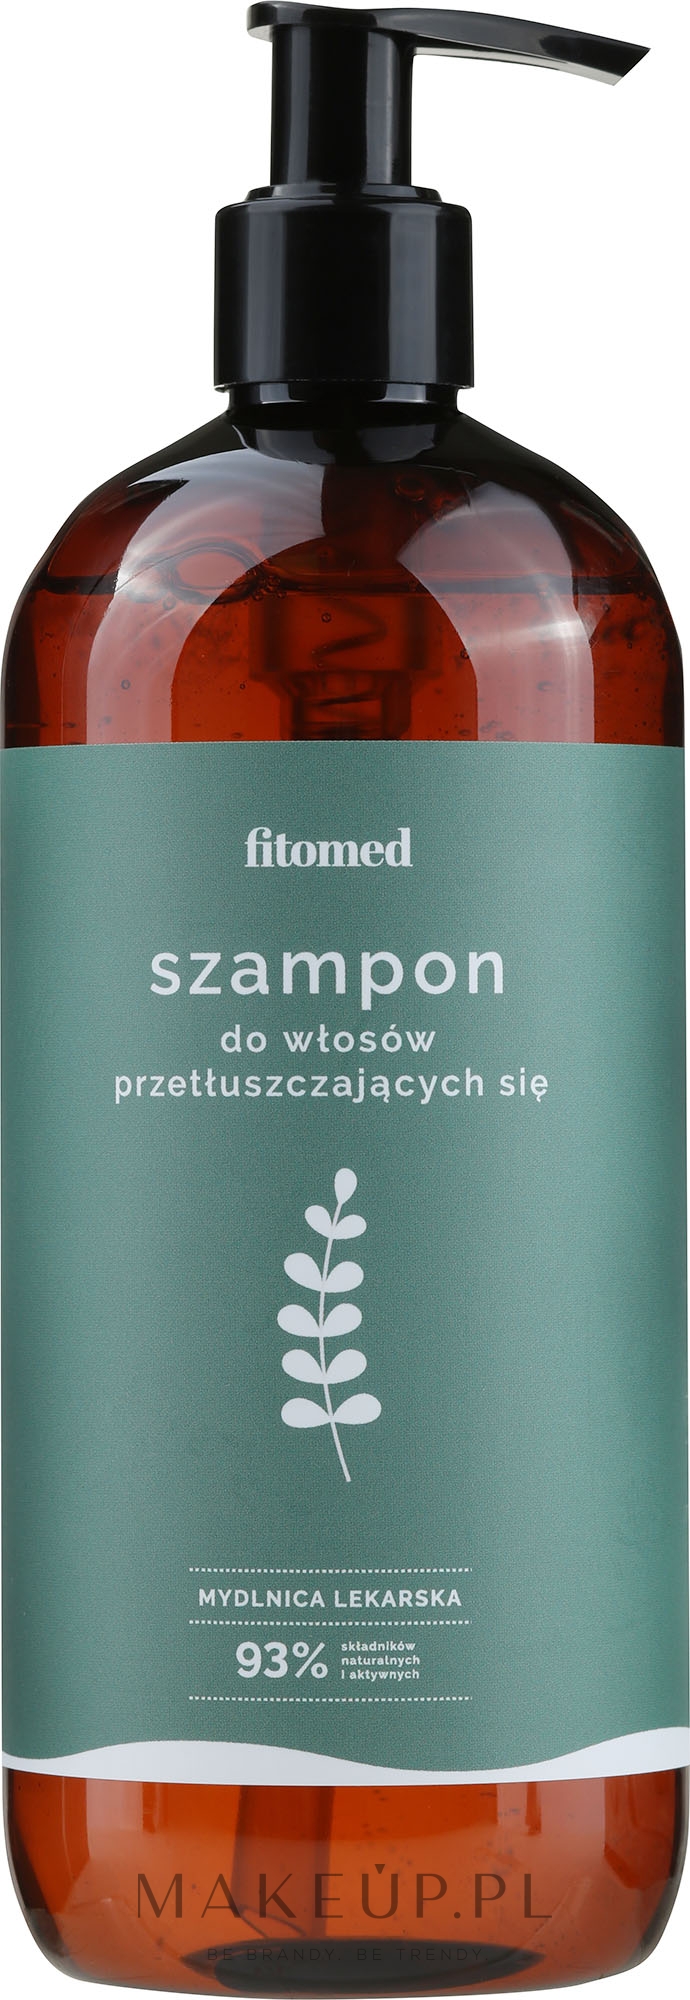 szampon fitomed opinie